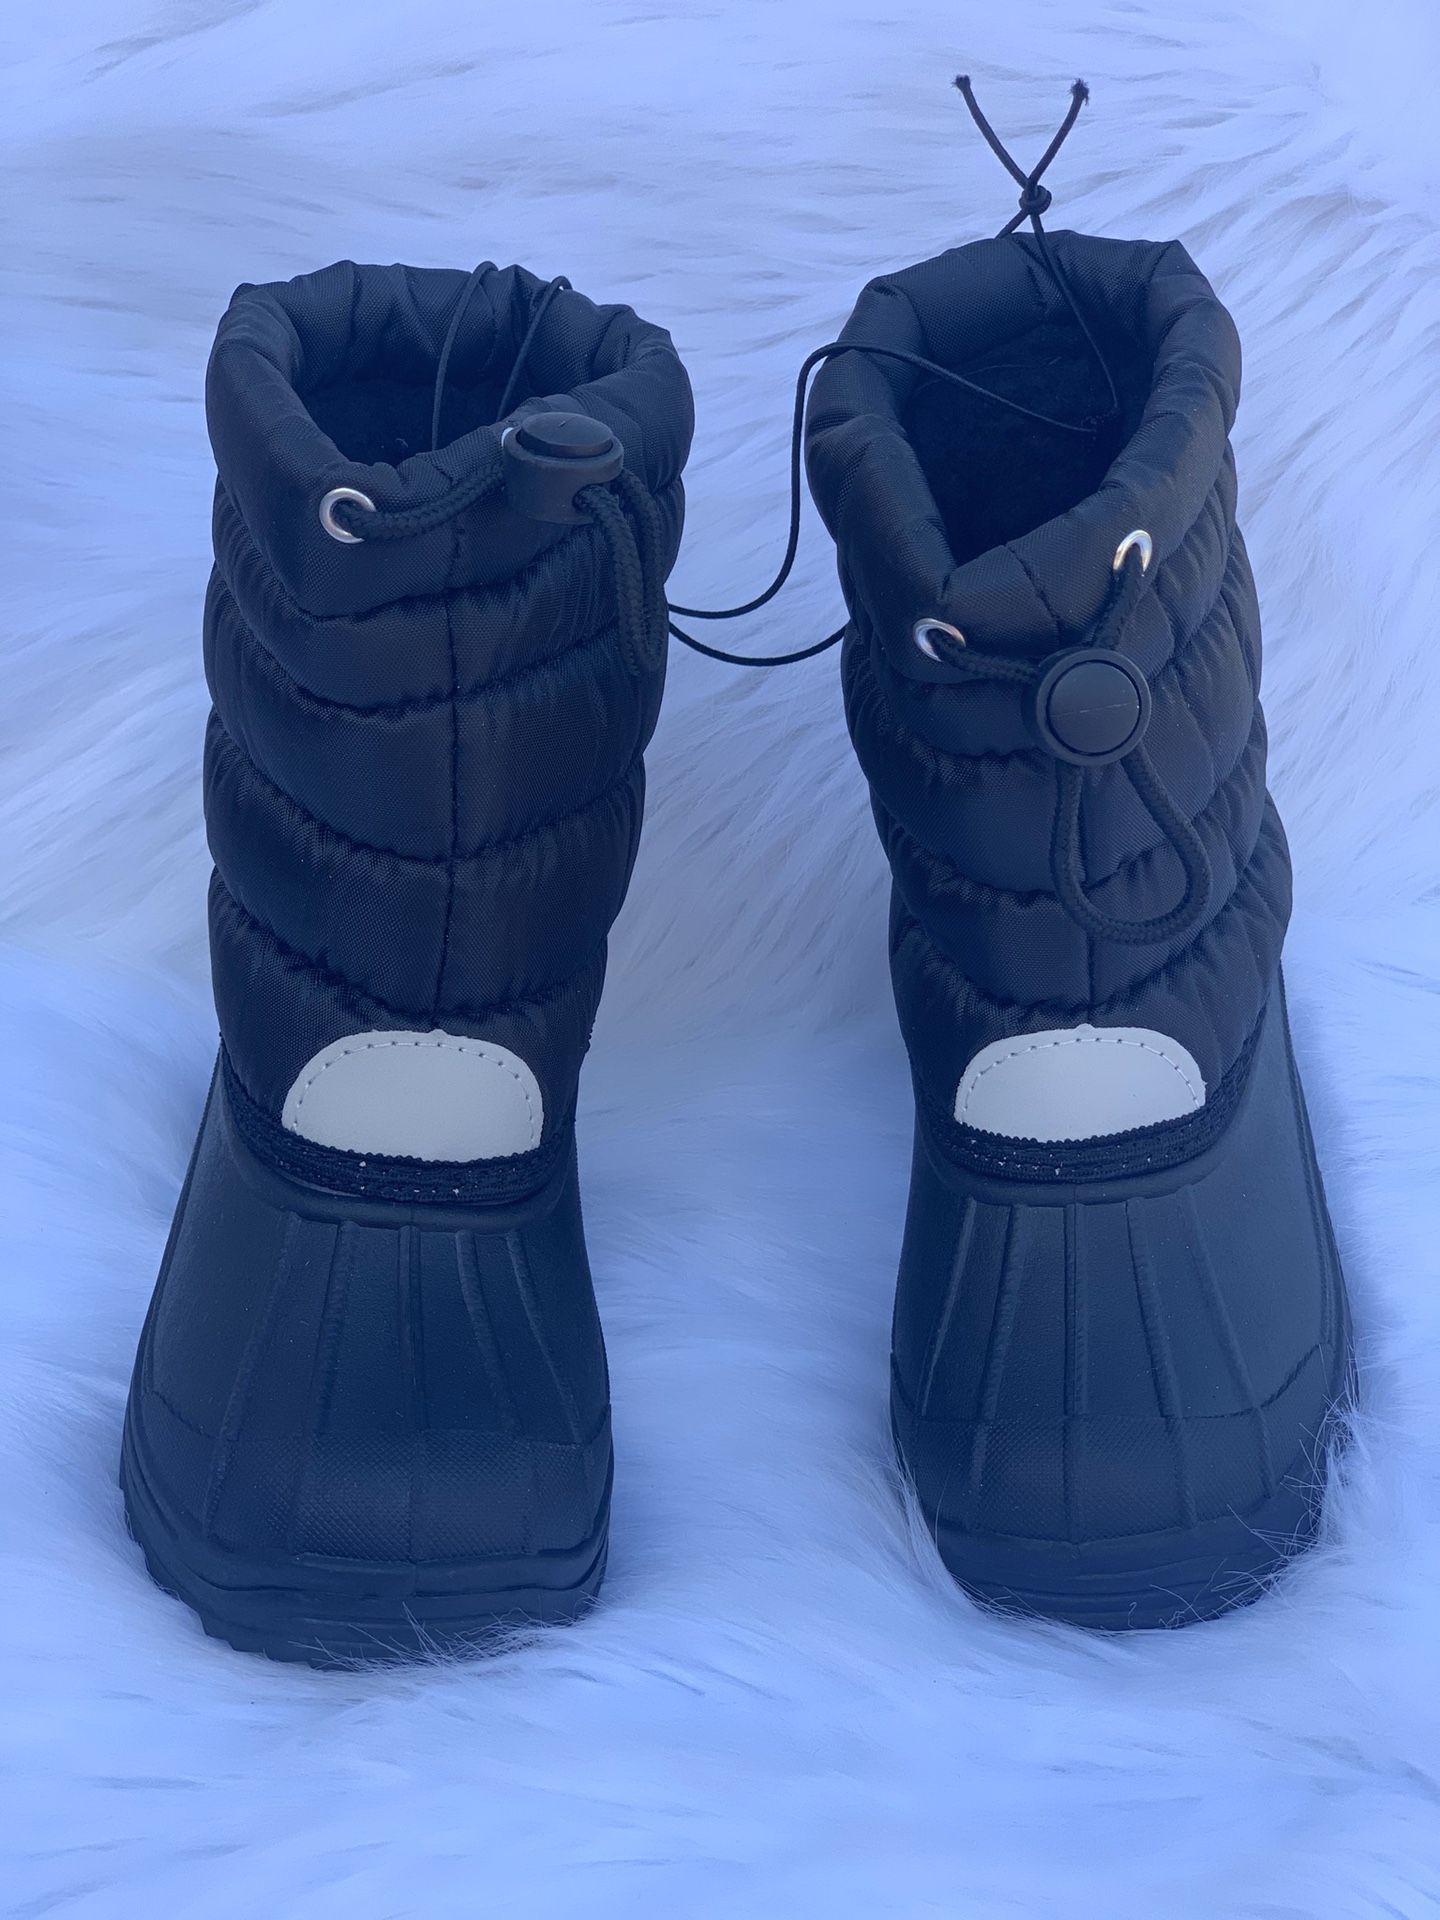 Snow boots for kids sizes 9,10,11,12,13,1,2,3,4 kids sizes